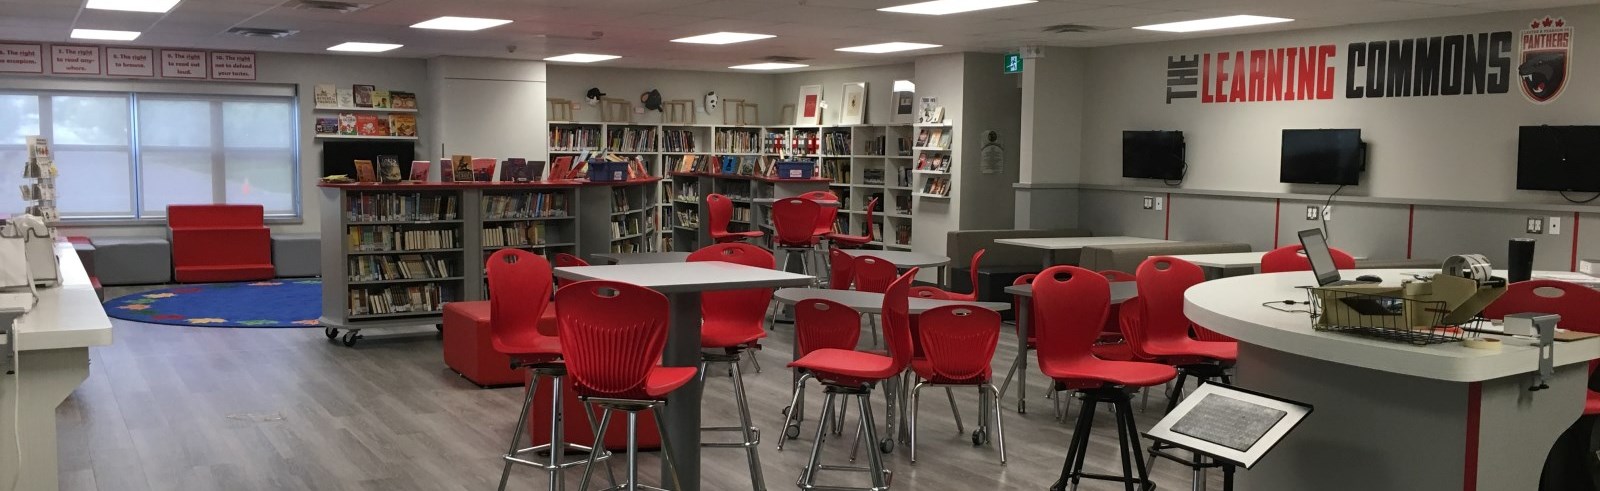 Lester B. Pearson Learning Commons